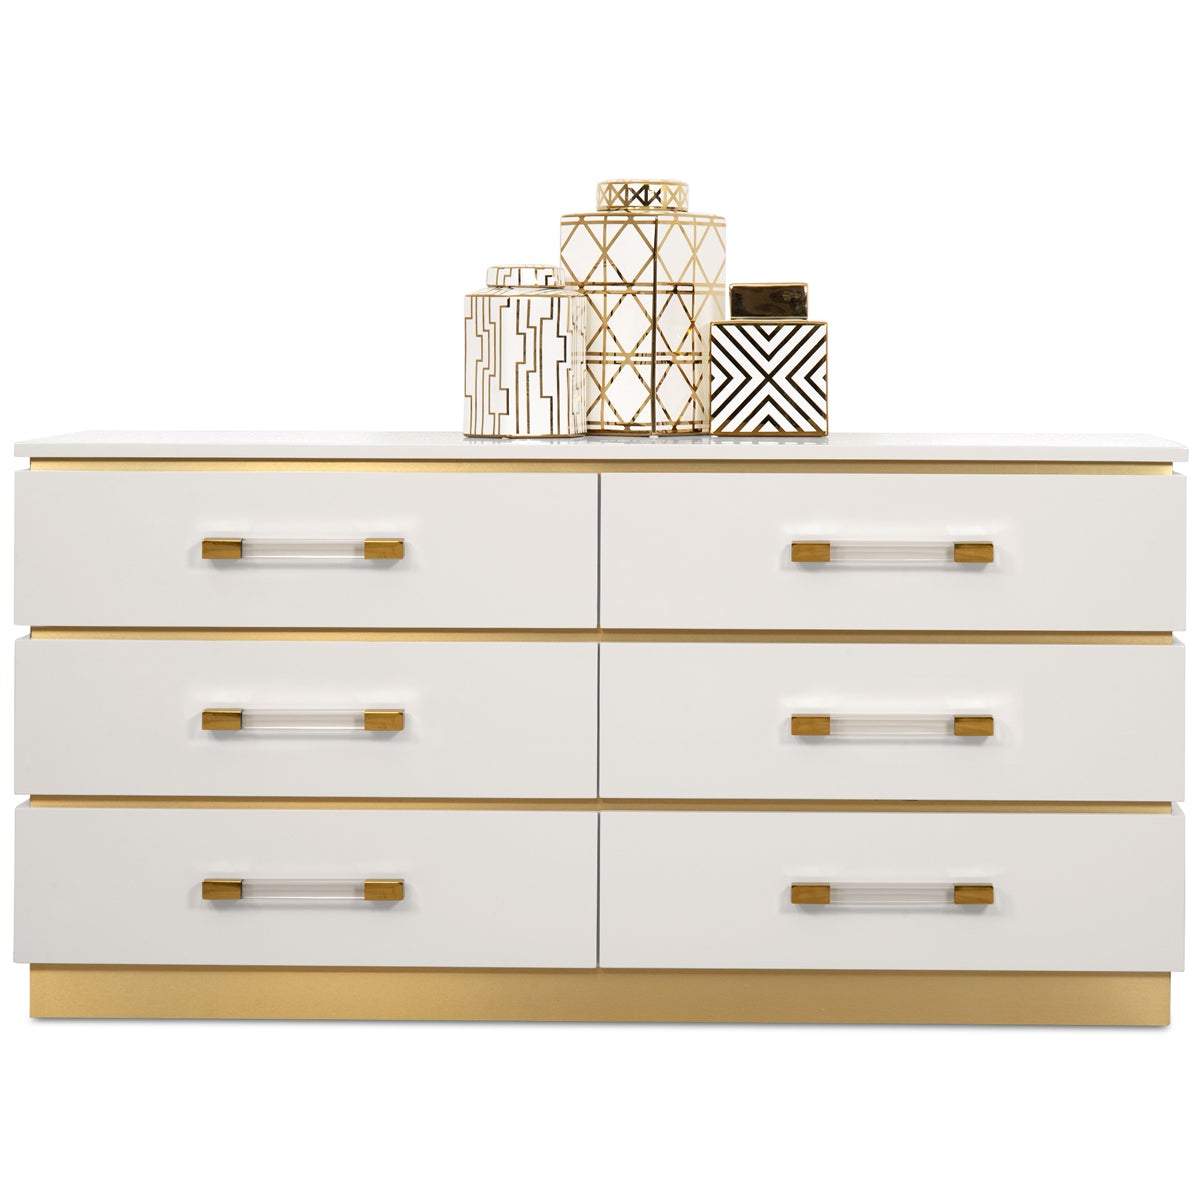 Six-drawer dresser with a brushed brass frame, pedestal base, white drawer fronts and Lucite drawer pulls.